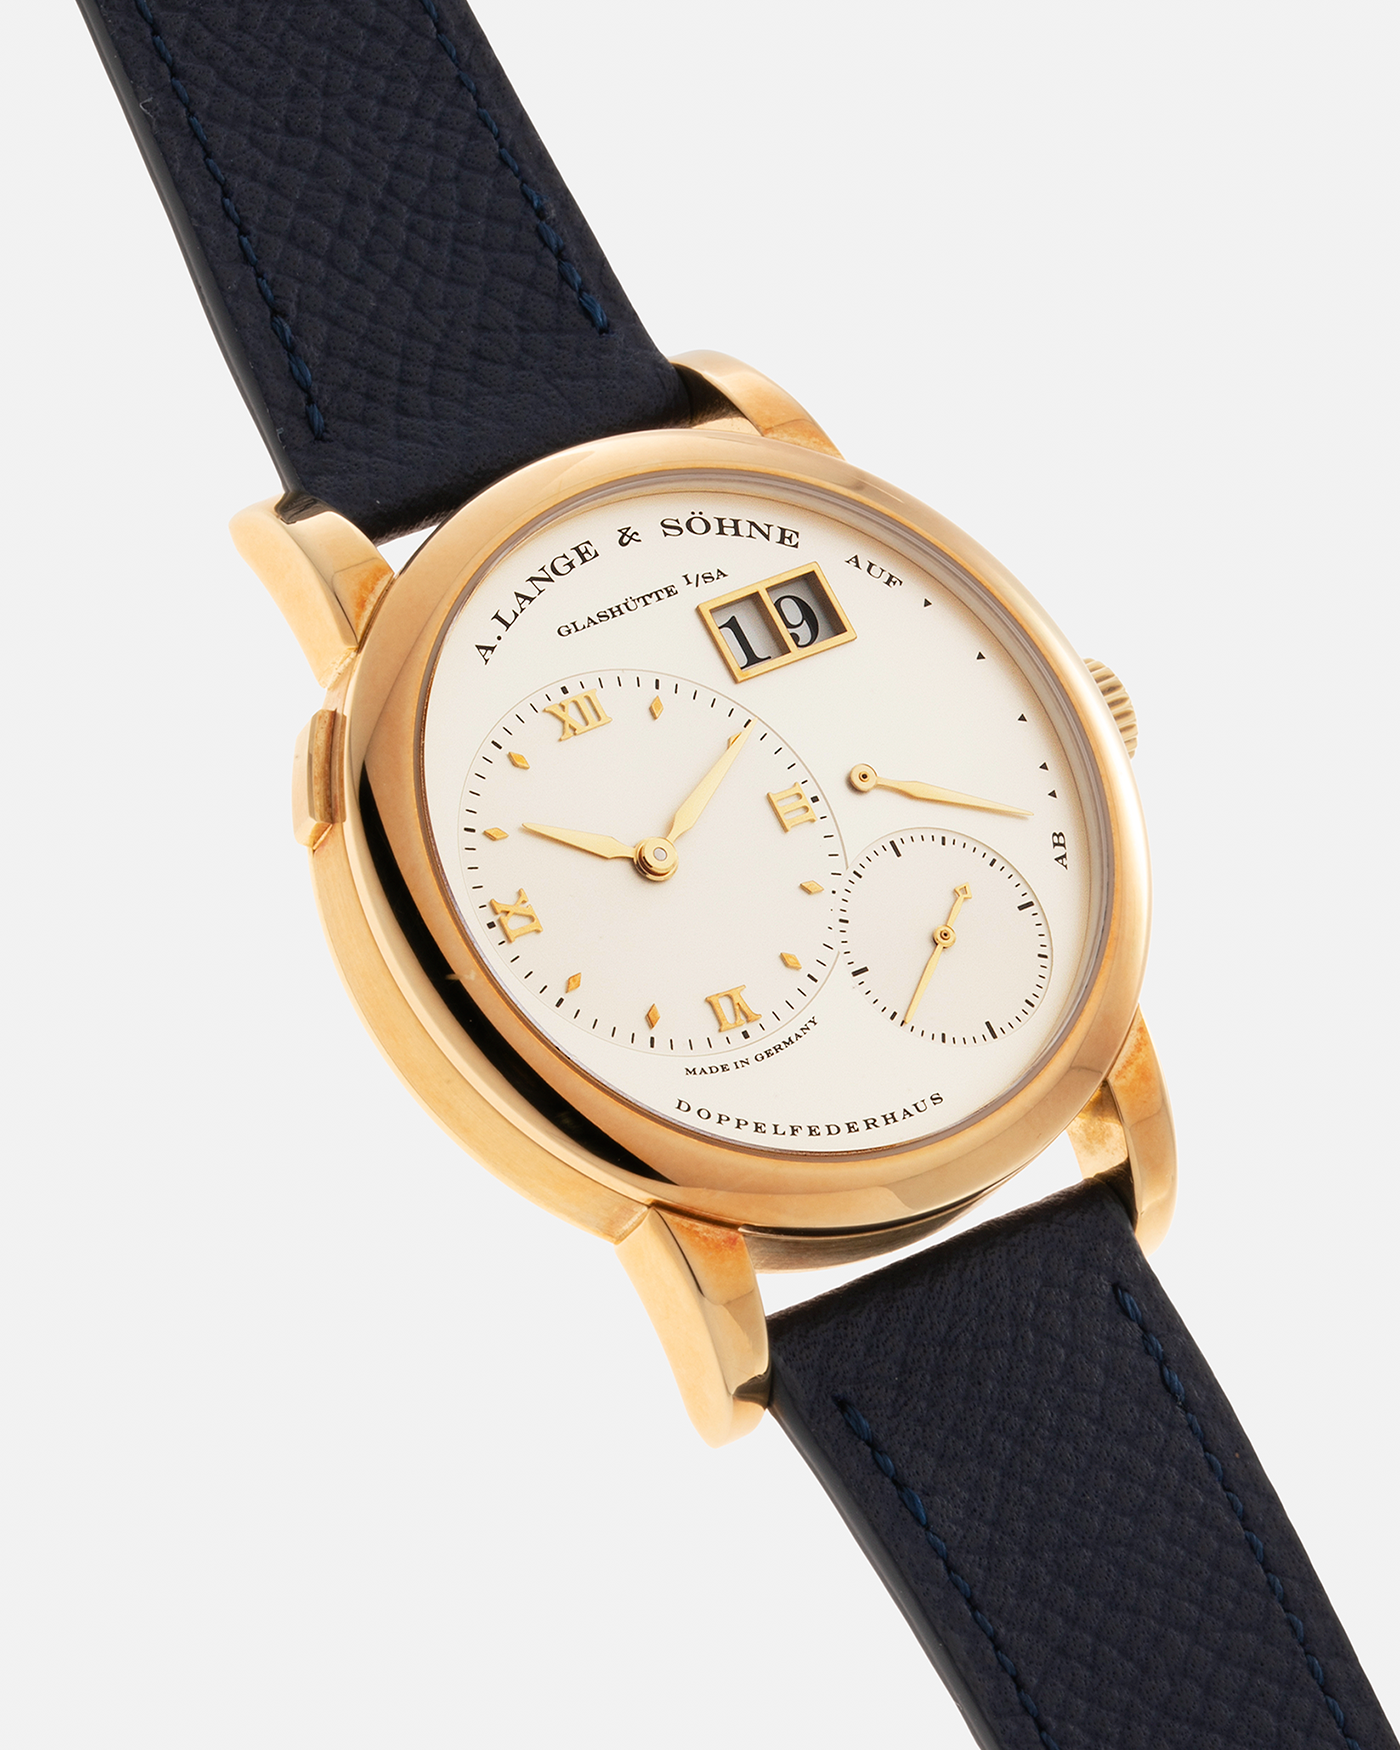 Brand: A. Lange & Söhne Year: 2019 Model: Lange 1 Reference Number: 101.021 Material: 18-carat Yellow Gold Movement: A. Lange & Söhne Cal. L901.0, Manual-Winding Case Diameter: 38.5mm x 9.8mm Lud Width: 20mm Strap: Nostime Blue Calf Leather Strap with Signed 18-carat Yellow Gold Tang Buckle, additional A. Lange & Söhne Brown Alligator Strap